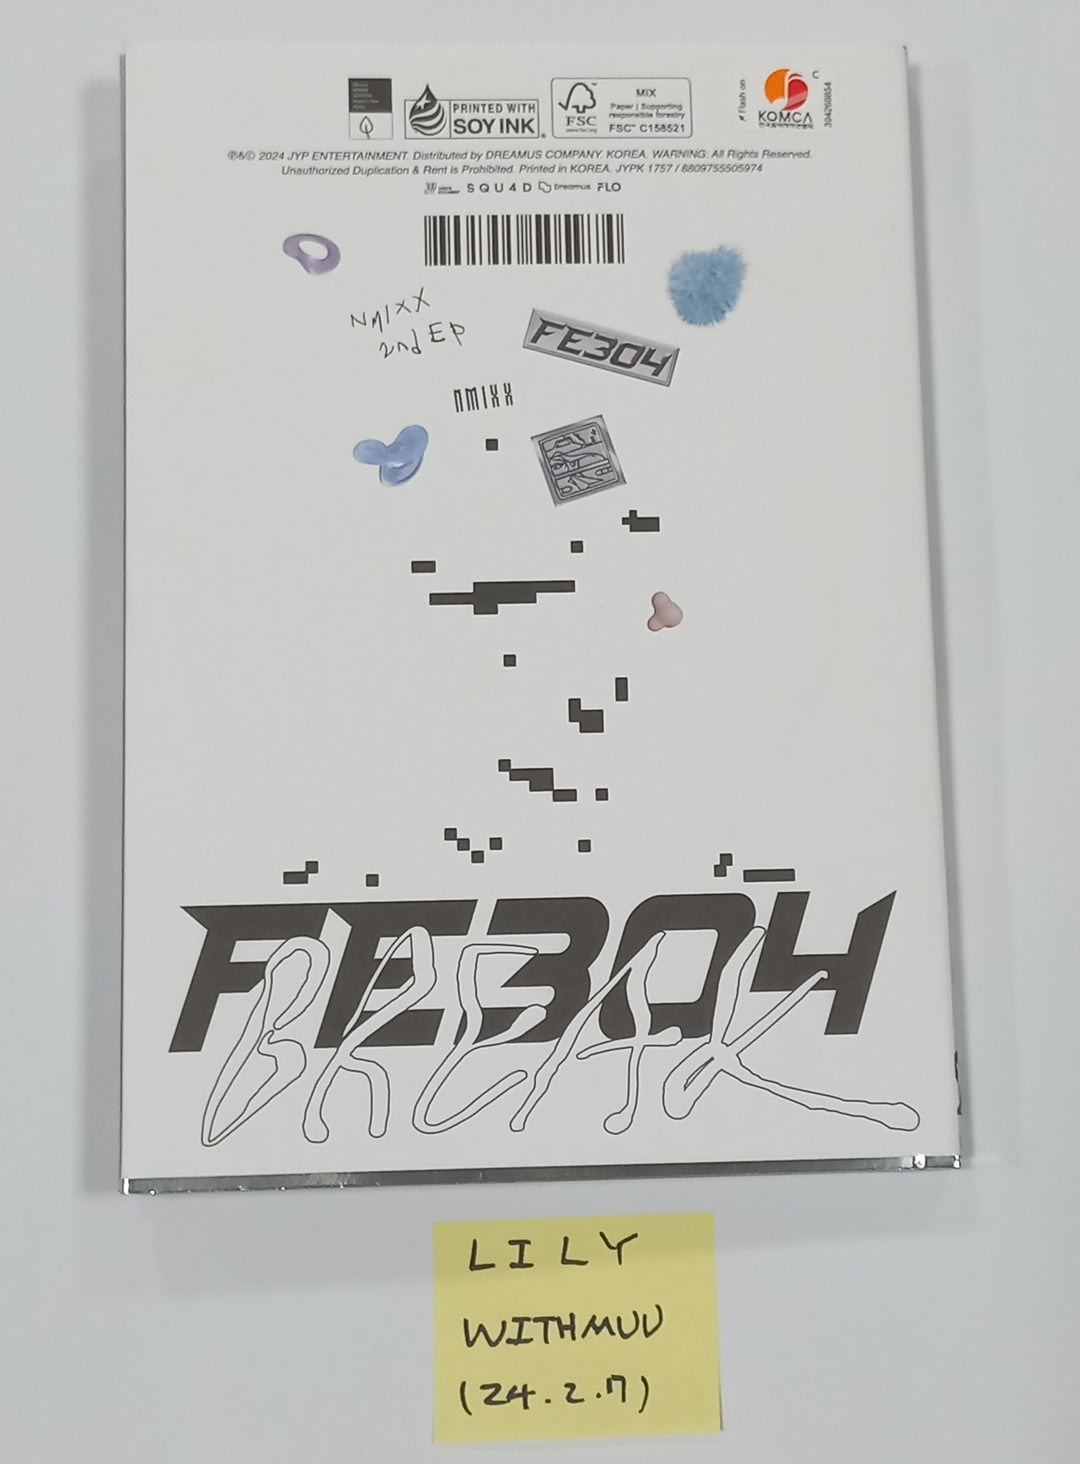 LILY (Of NMIXX) "Fe3O4: Break" - Hand Autographed(Signed) Album [24.2.7]